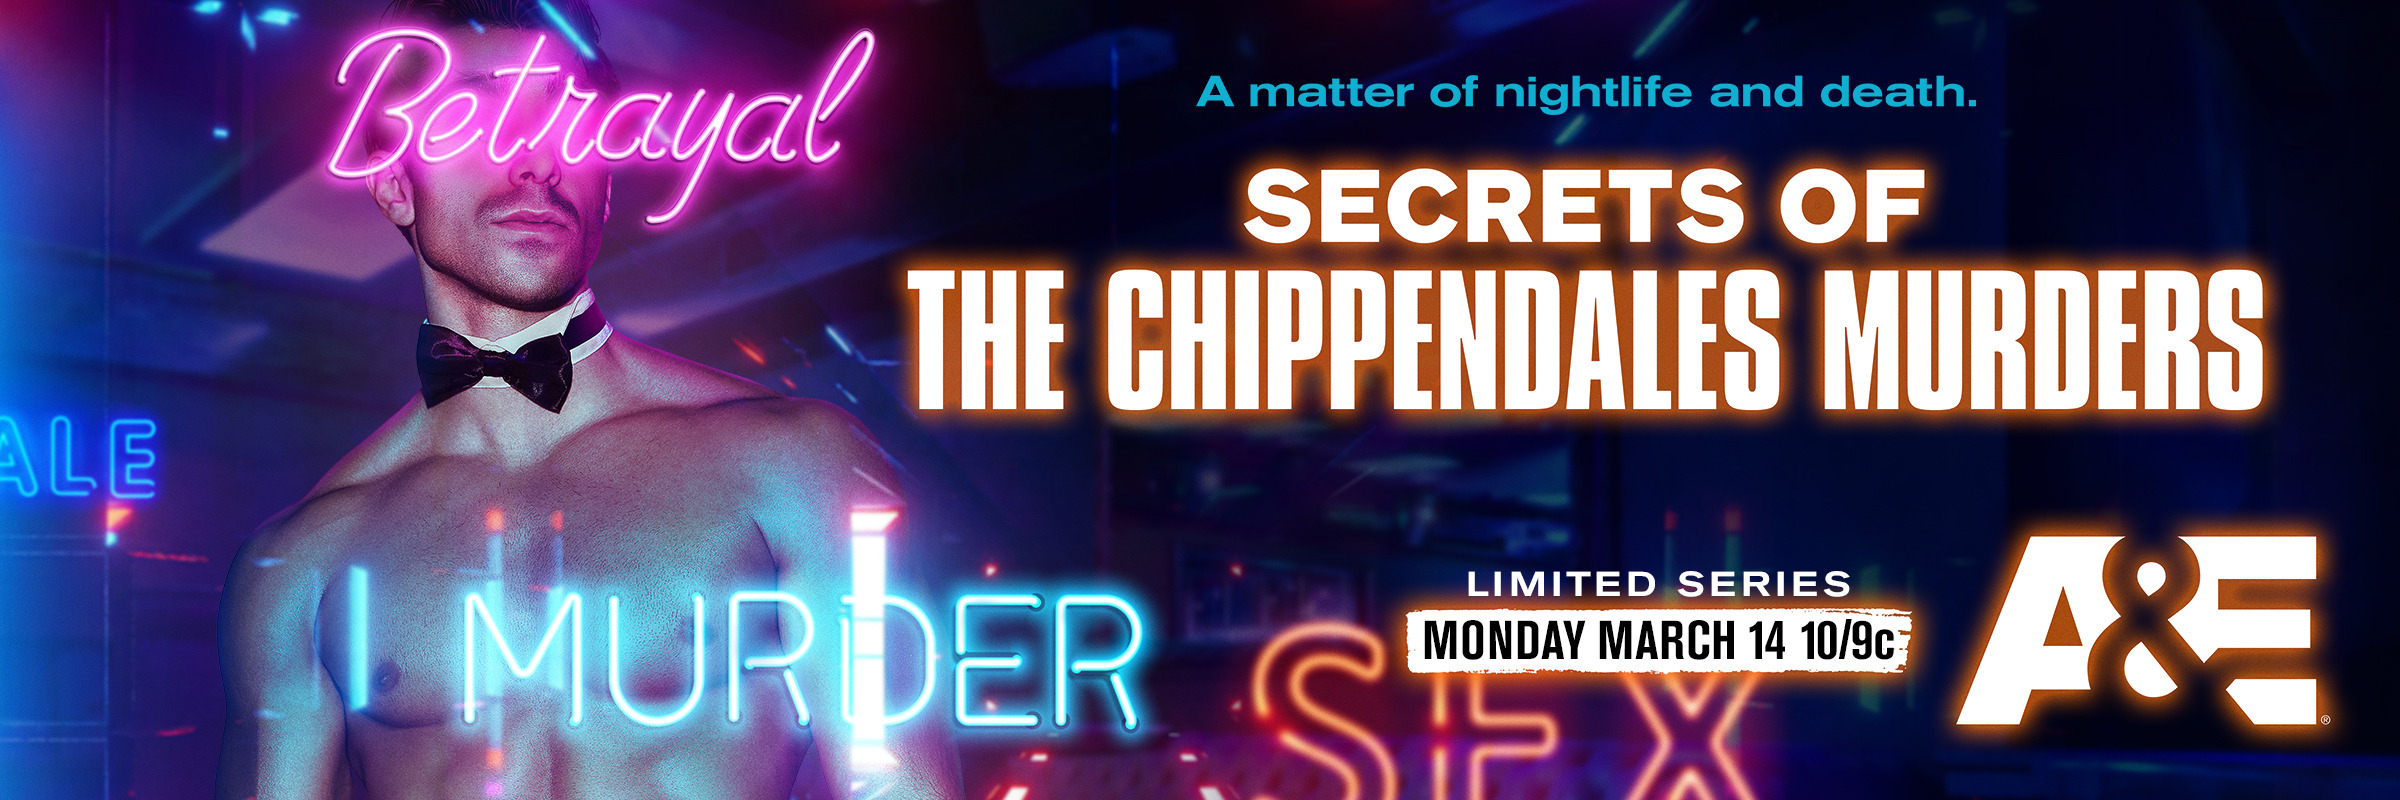 Mega Sized TV Poster Image for Secrets of the Chippendales Murders (#2 of 2)